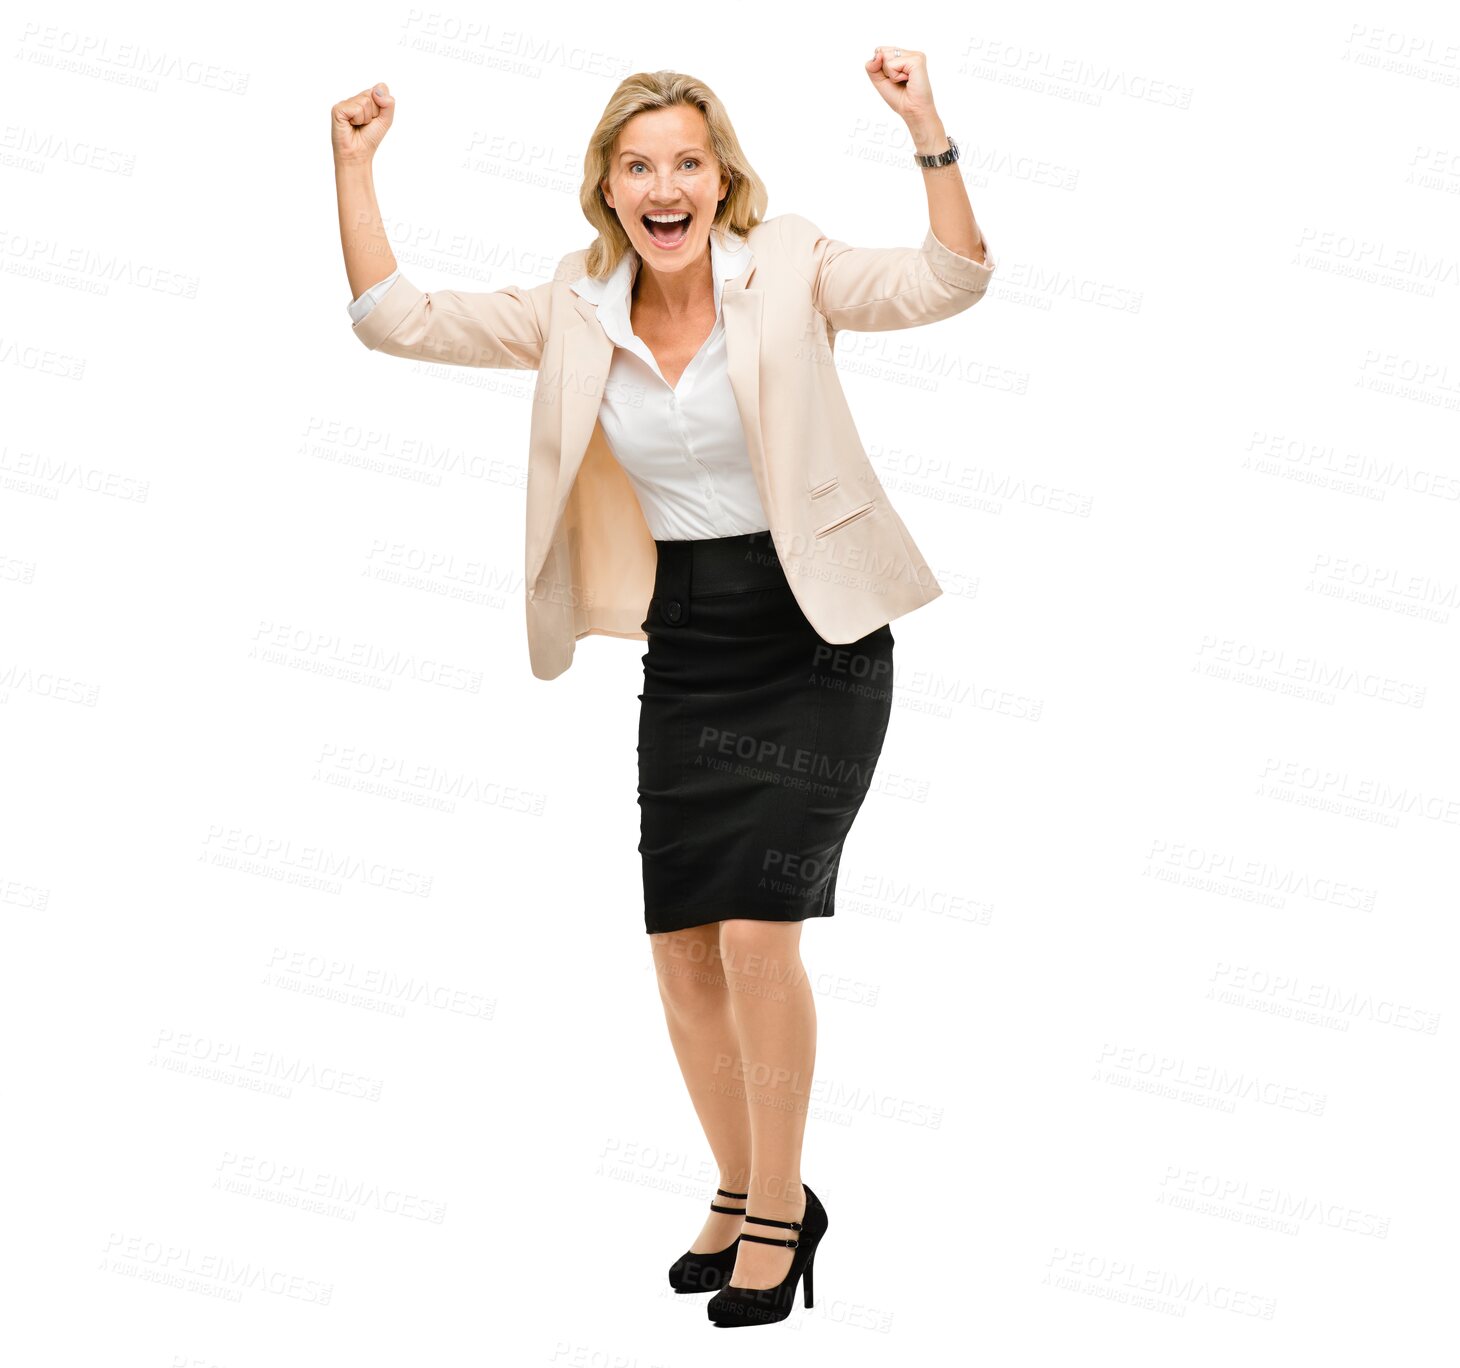 Buy stock photo Business, woman and portrait of celebration for winning or success on transparent, isolated or png background. Excited, energy and person with bonus, achievement or cheering with fist for promotion